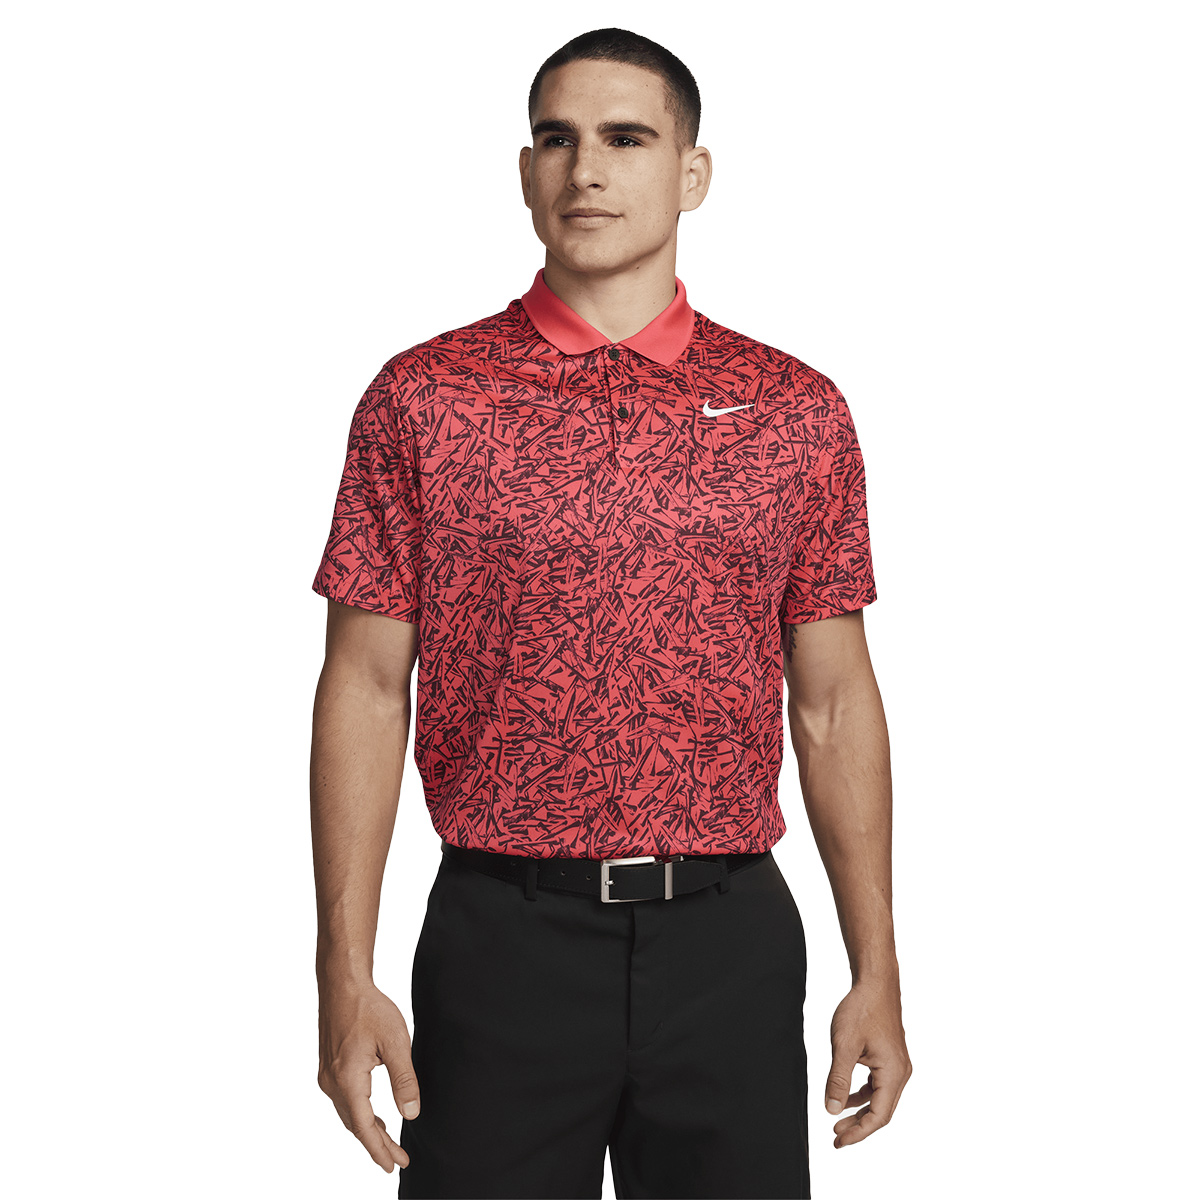 Nike Men's Victory Micro All-Over Print Golf Polo Shirt from american golf